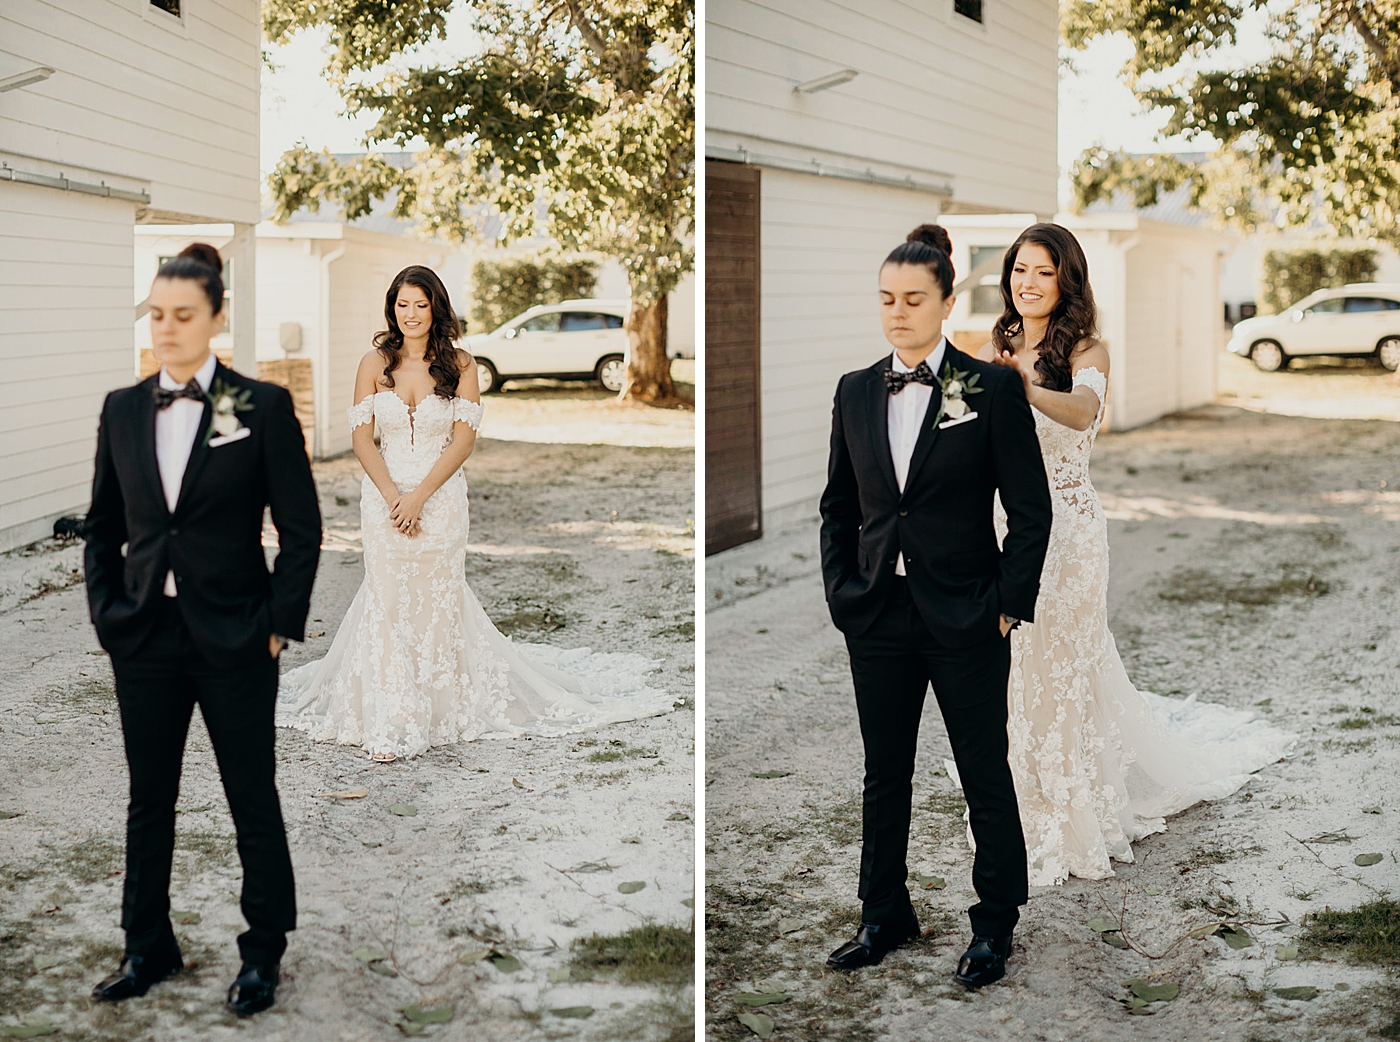 First look with Bride behind tapping on shoulder outside Ever After Farms Wedding Photography captured by South Florida Wedding Photographer Maggie Alvarez Photography